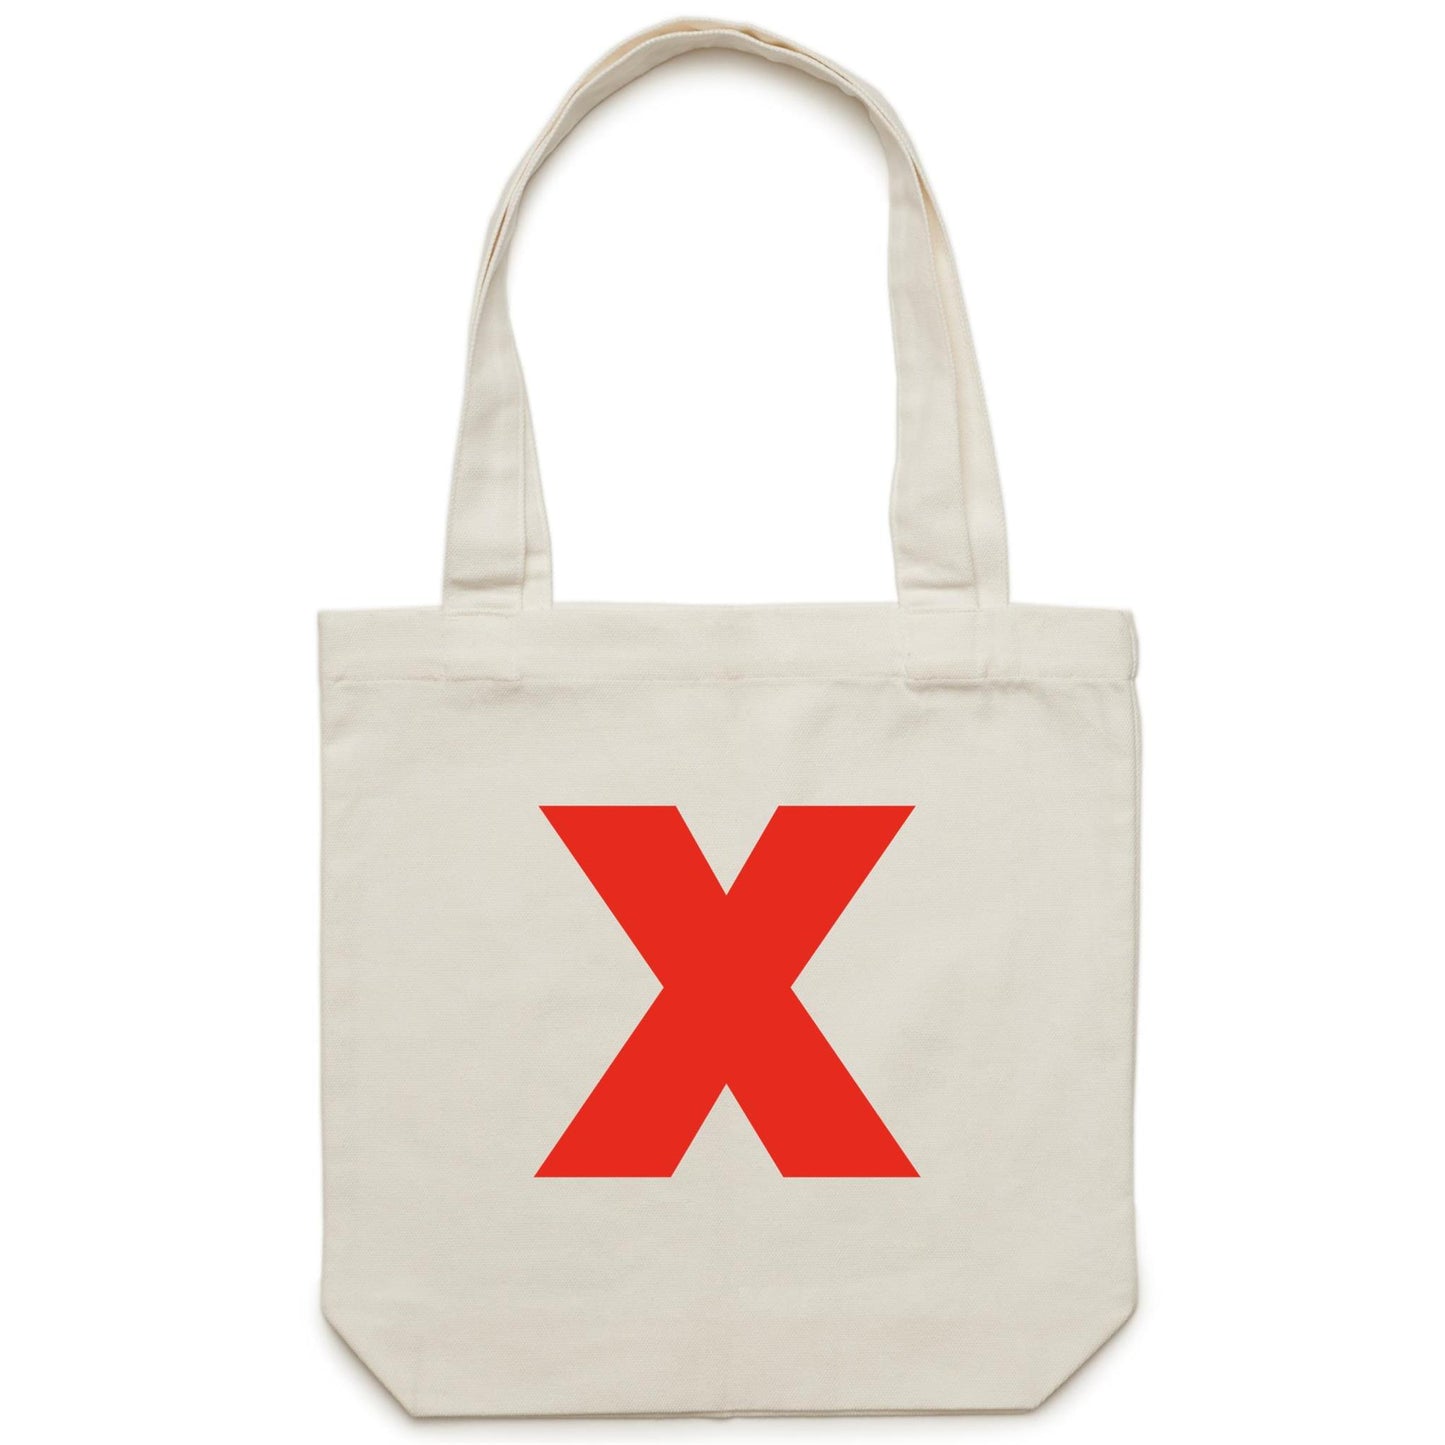 TED X Canvas Totes